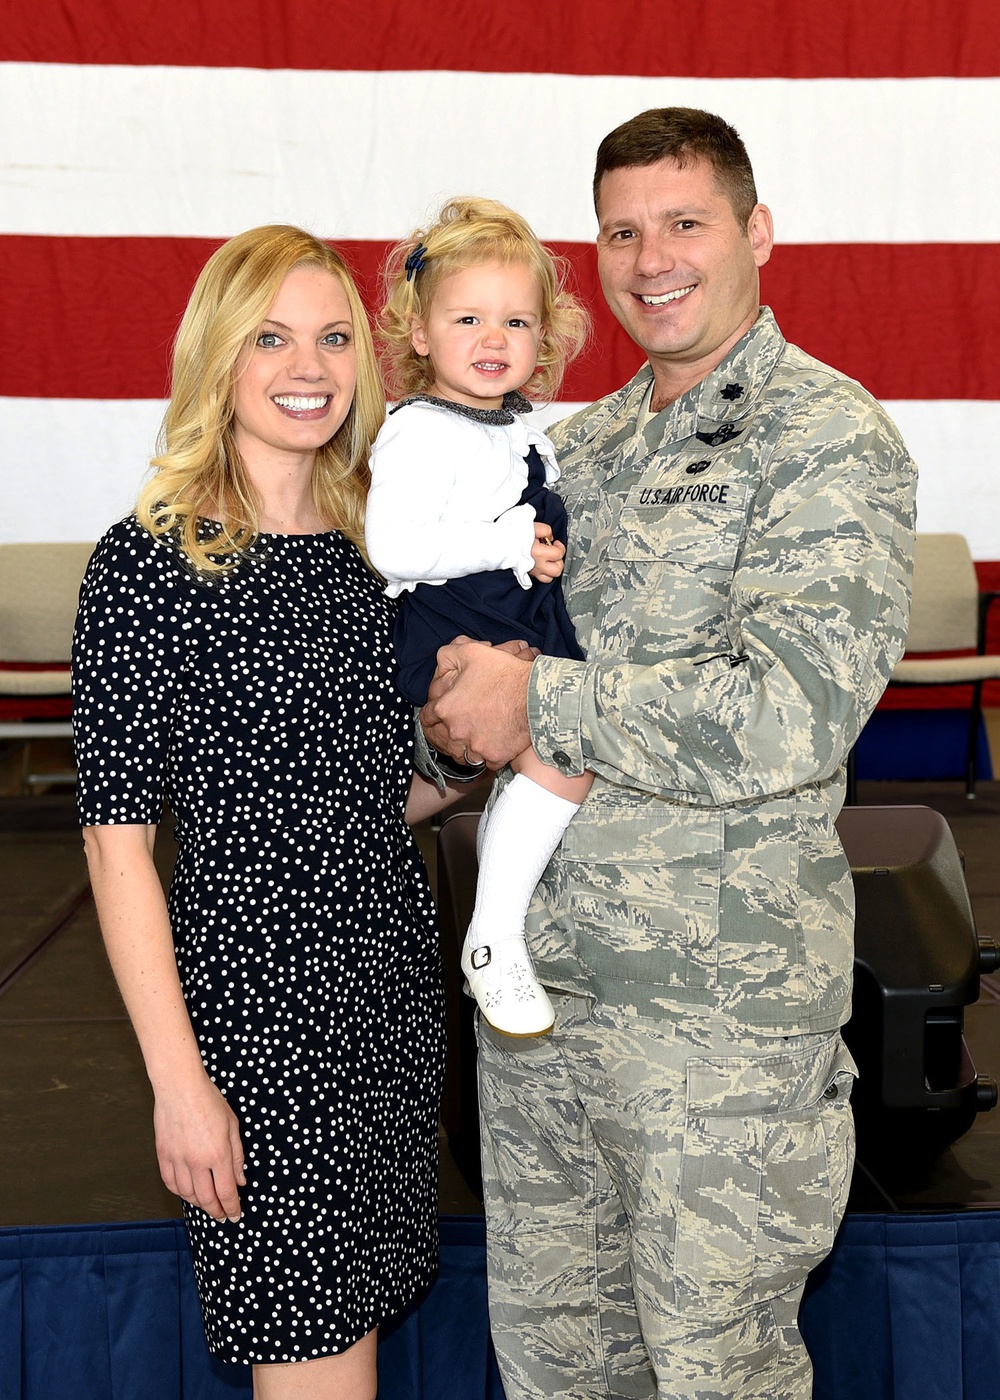 159th Fighter Wing conducts Change of Command for Maintenance Group